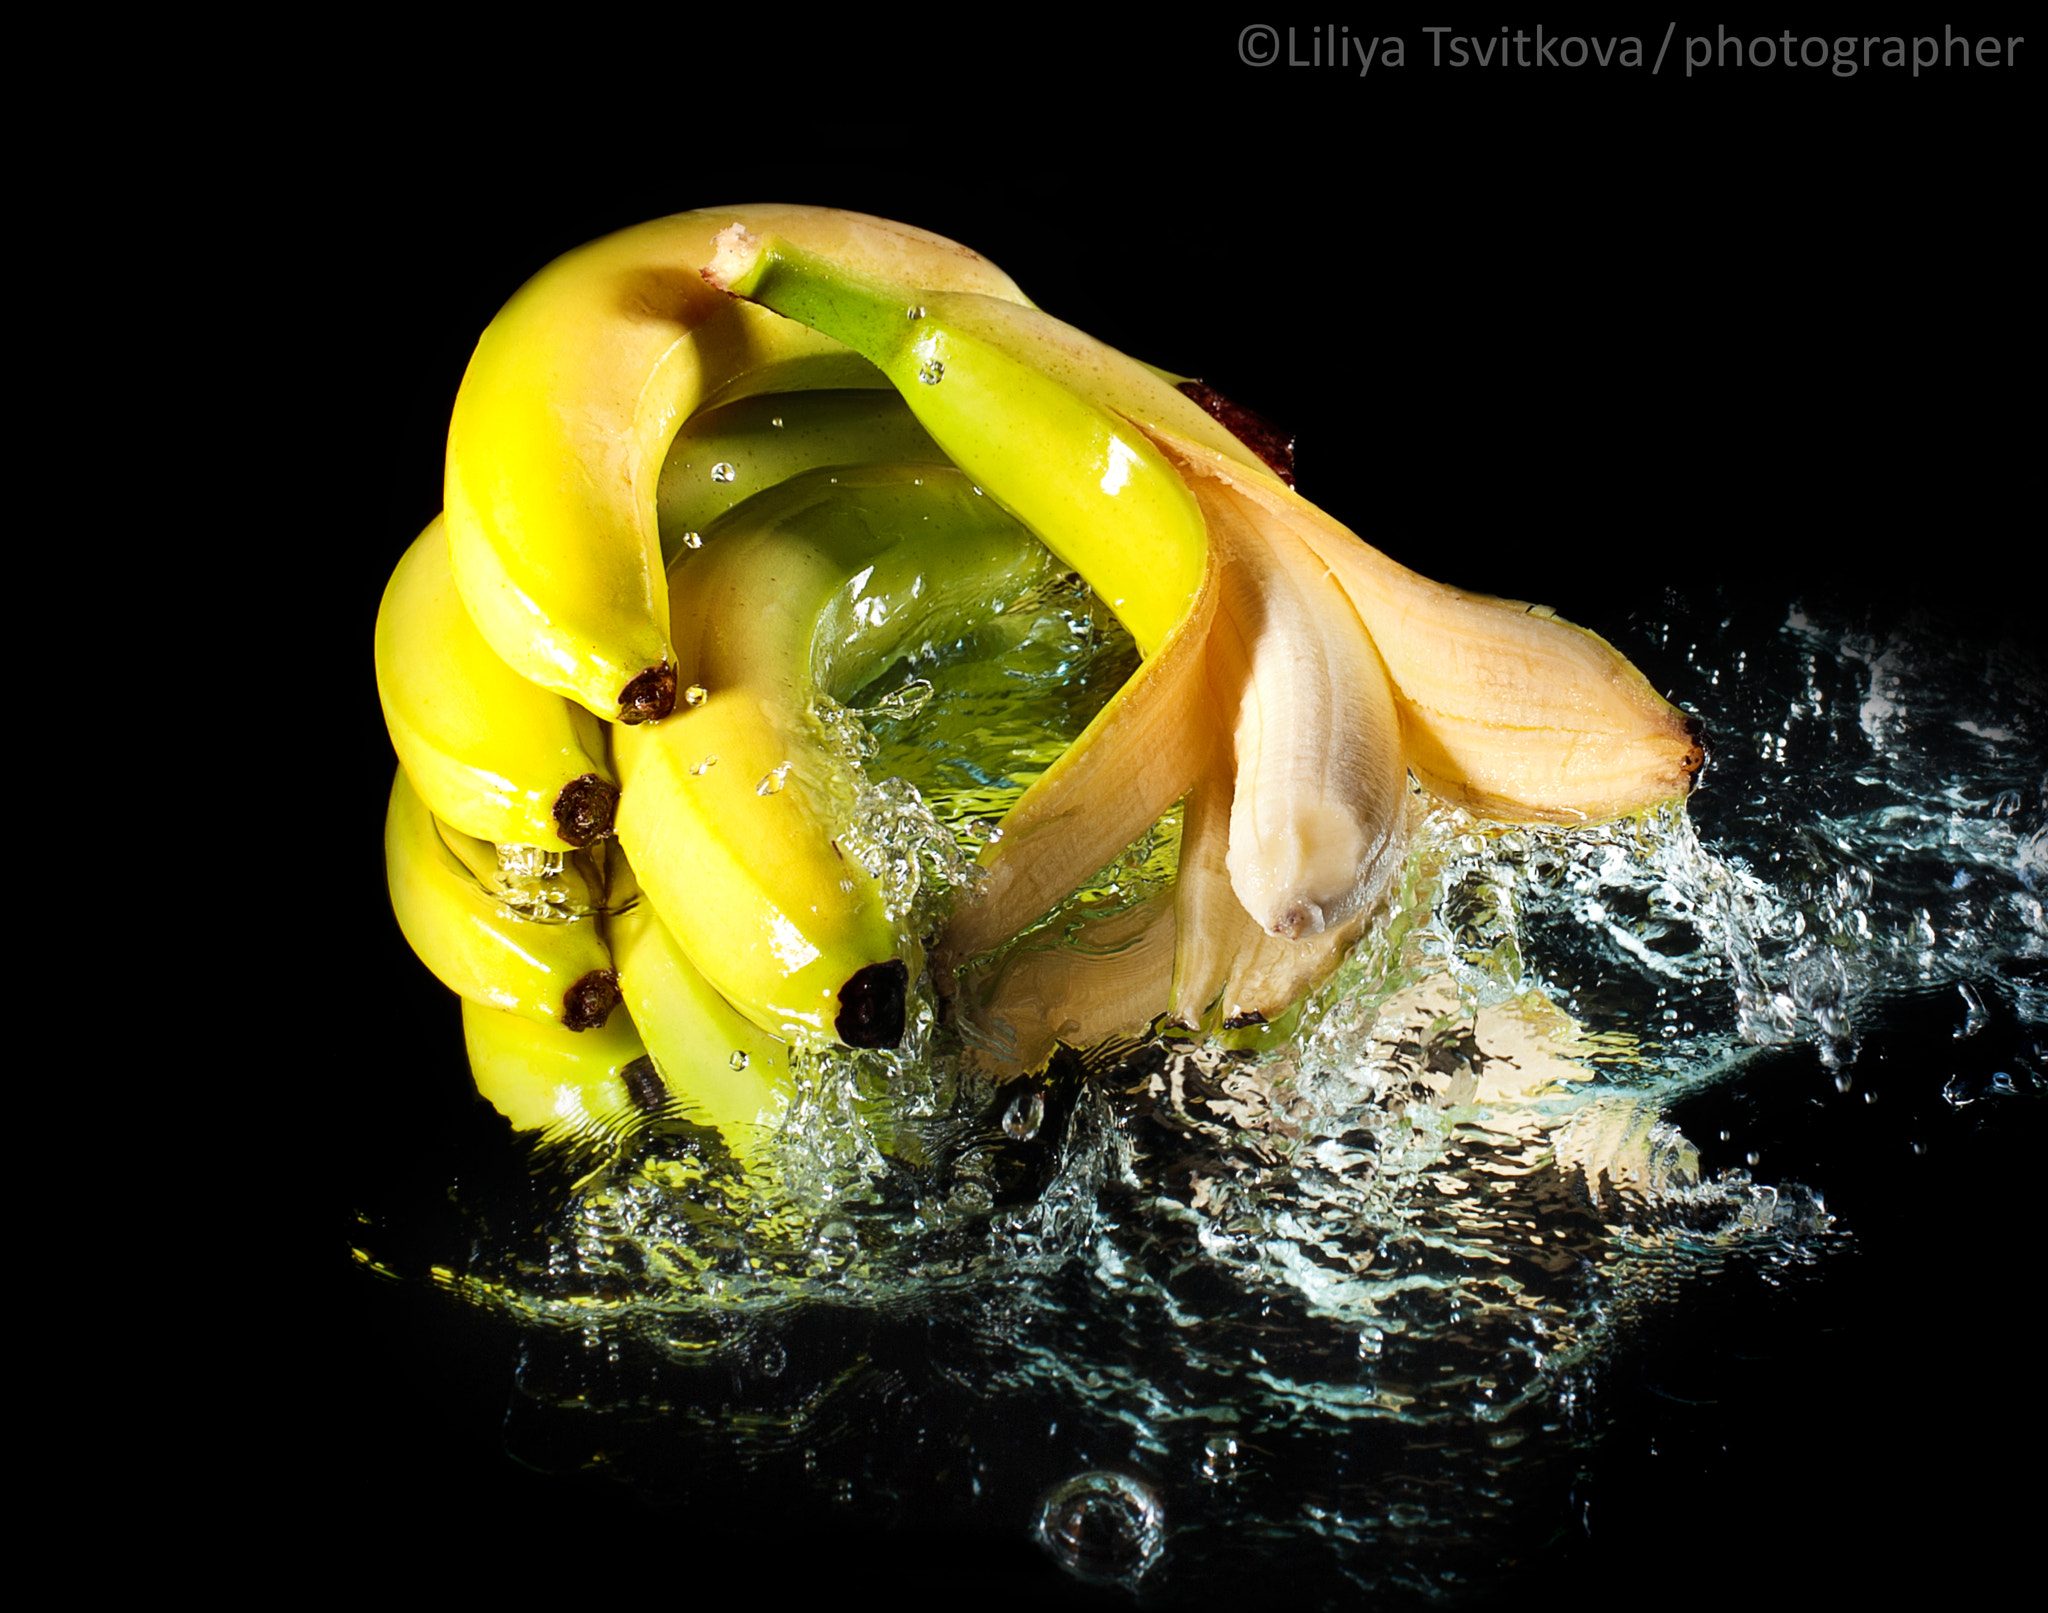 ZEISS Planar T* 50mm F1.4 sample photo. Bananas in water photography